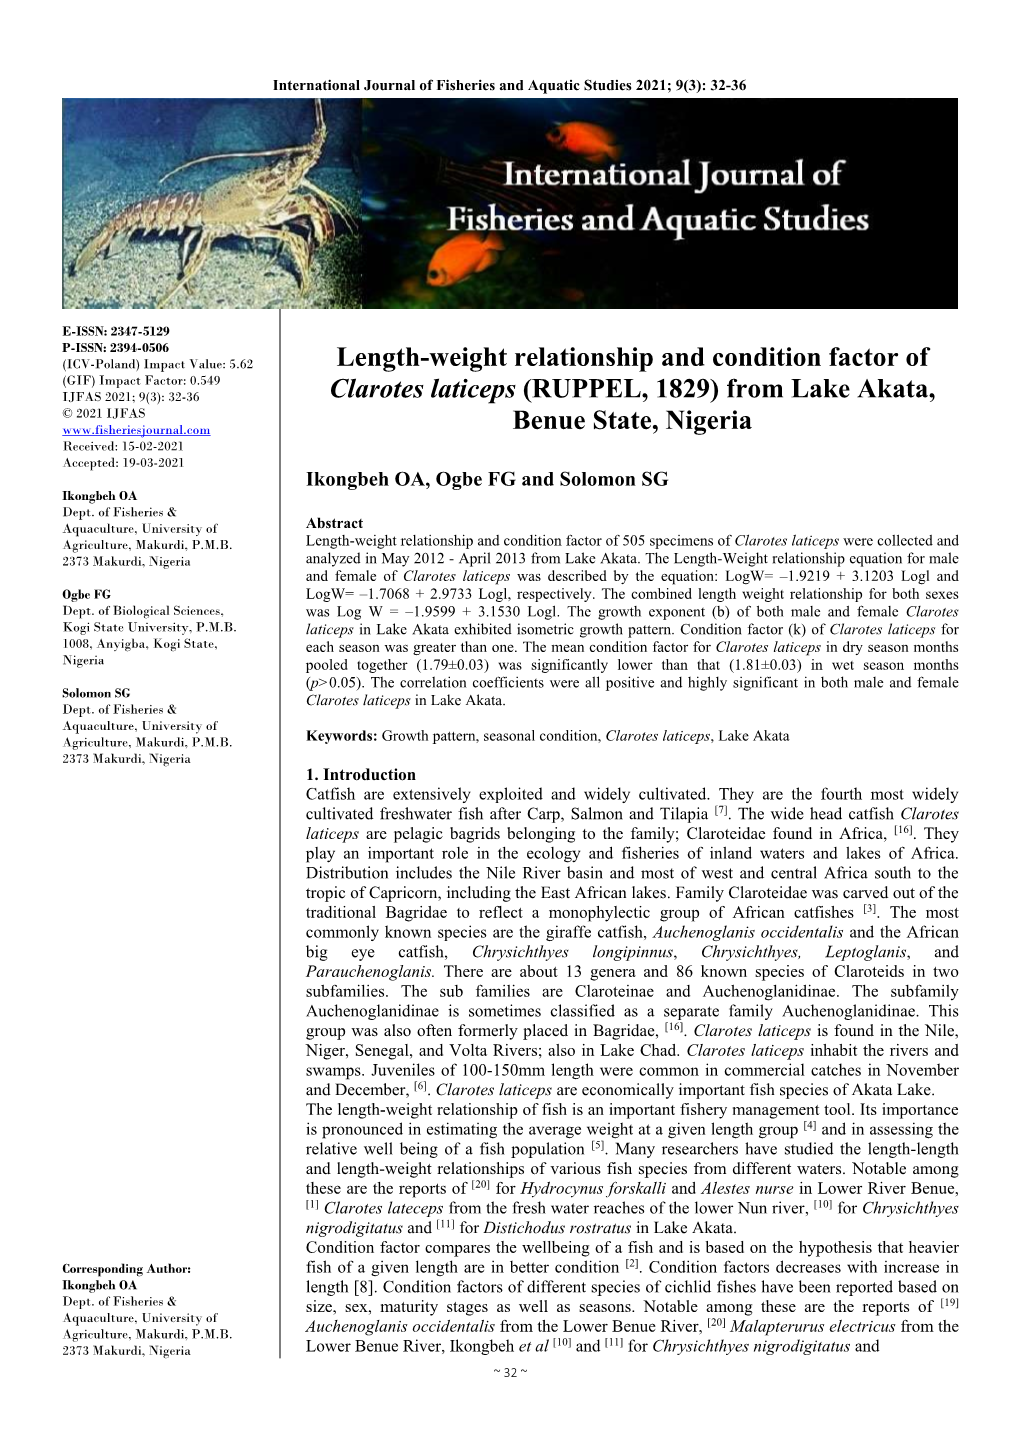 Length-Weight Relationship and Condition Factor of Clarotes Laticeps